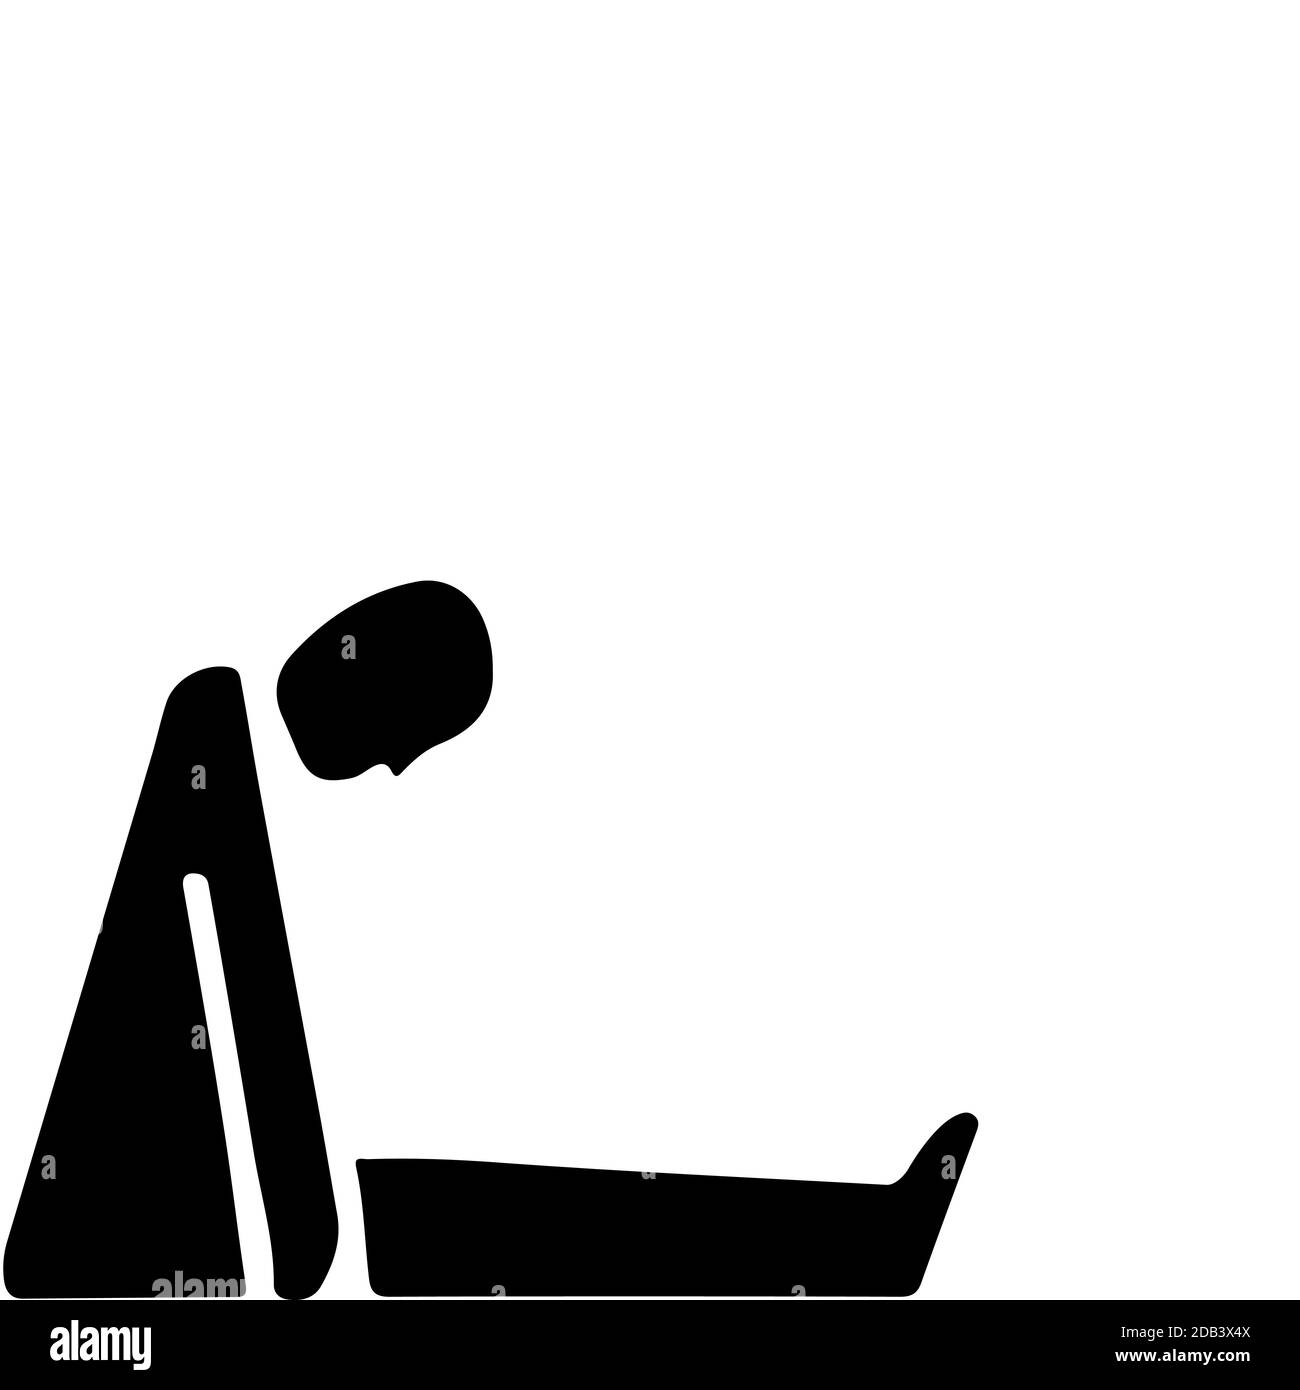 Knocked out person, tired exhausted depressed sitting man, symbol of asphyxia, flat minimalist vector illustration Stock Vector